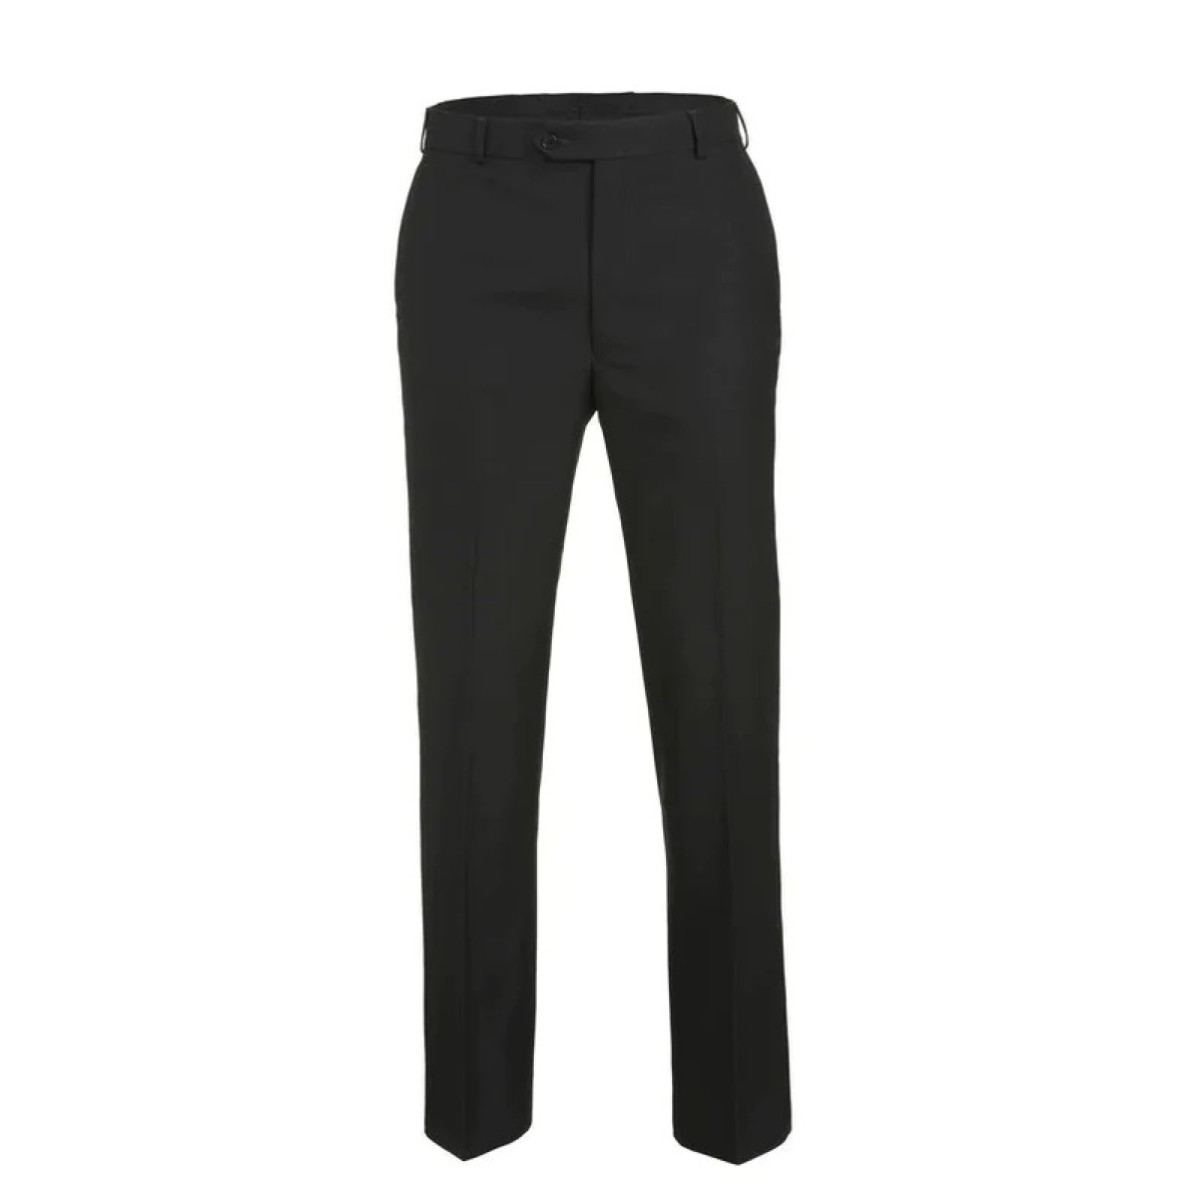 Magee Suit Trouser T2 Mix n Match Charcoal - Simpsons of Cornwall